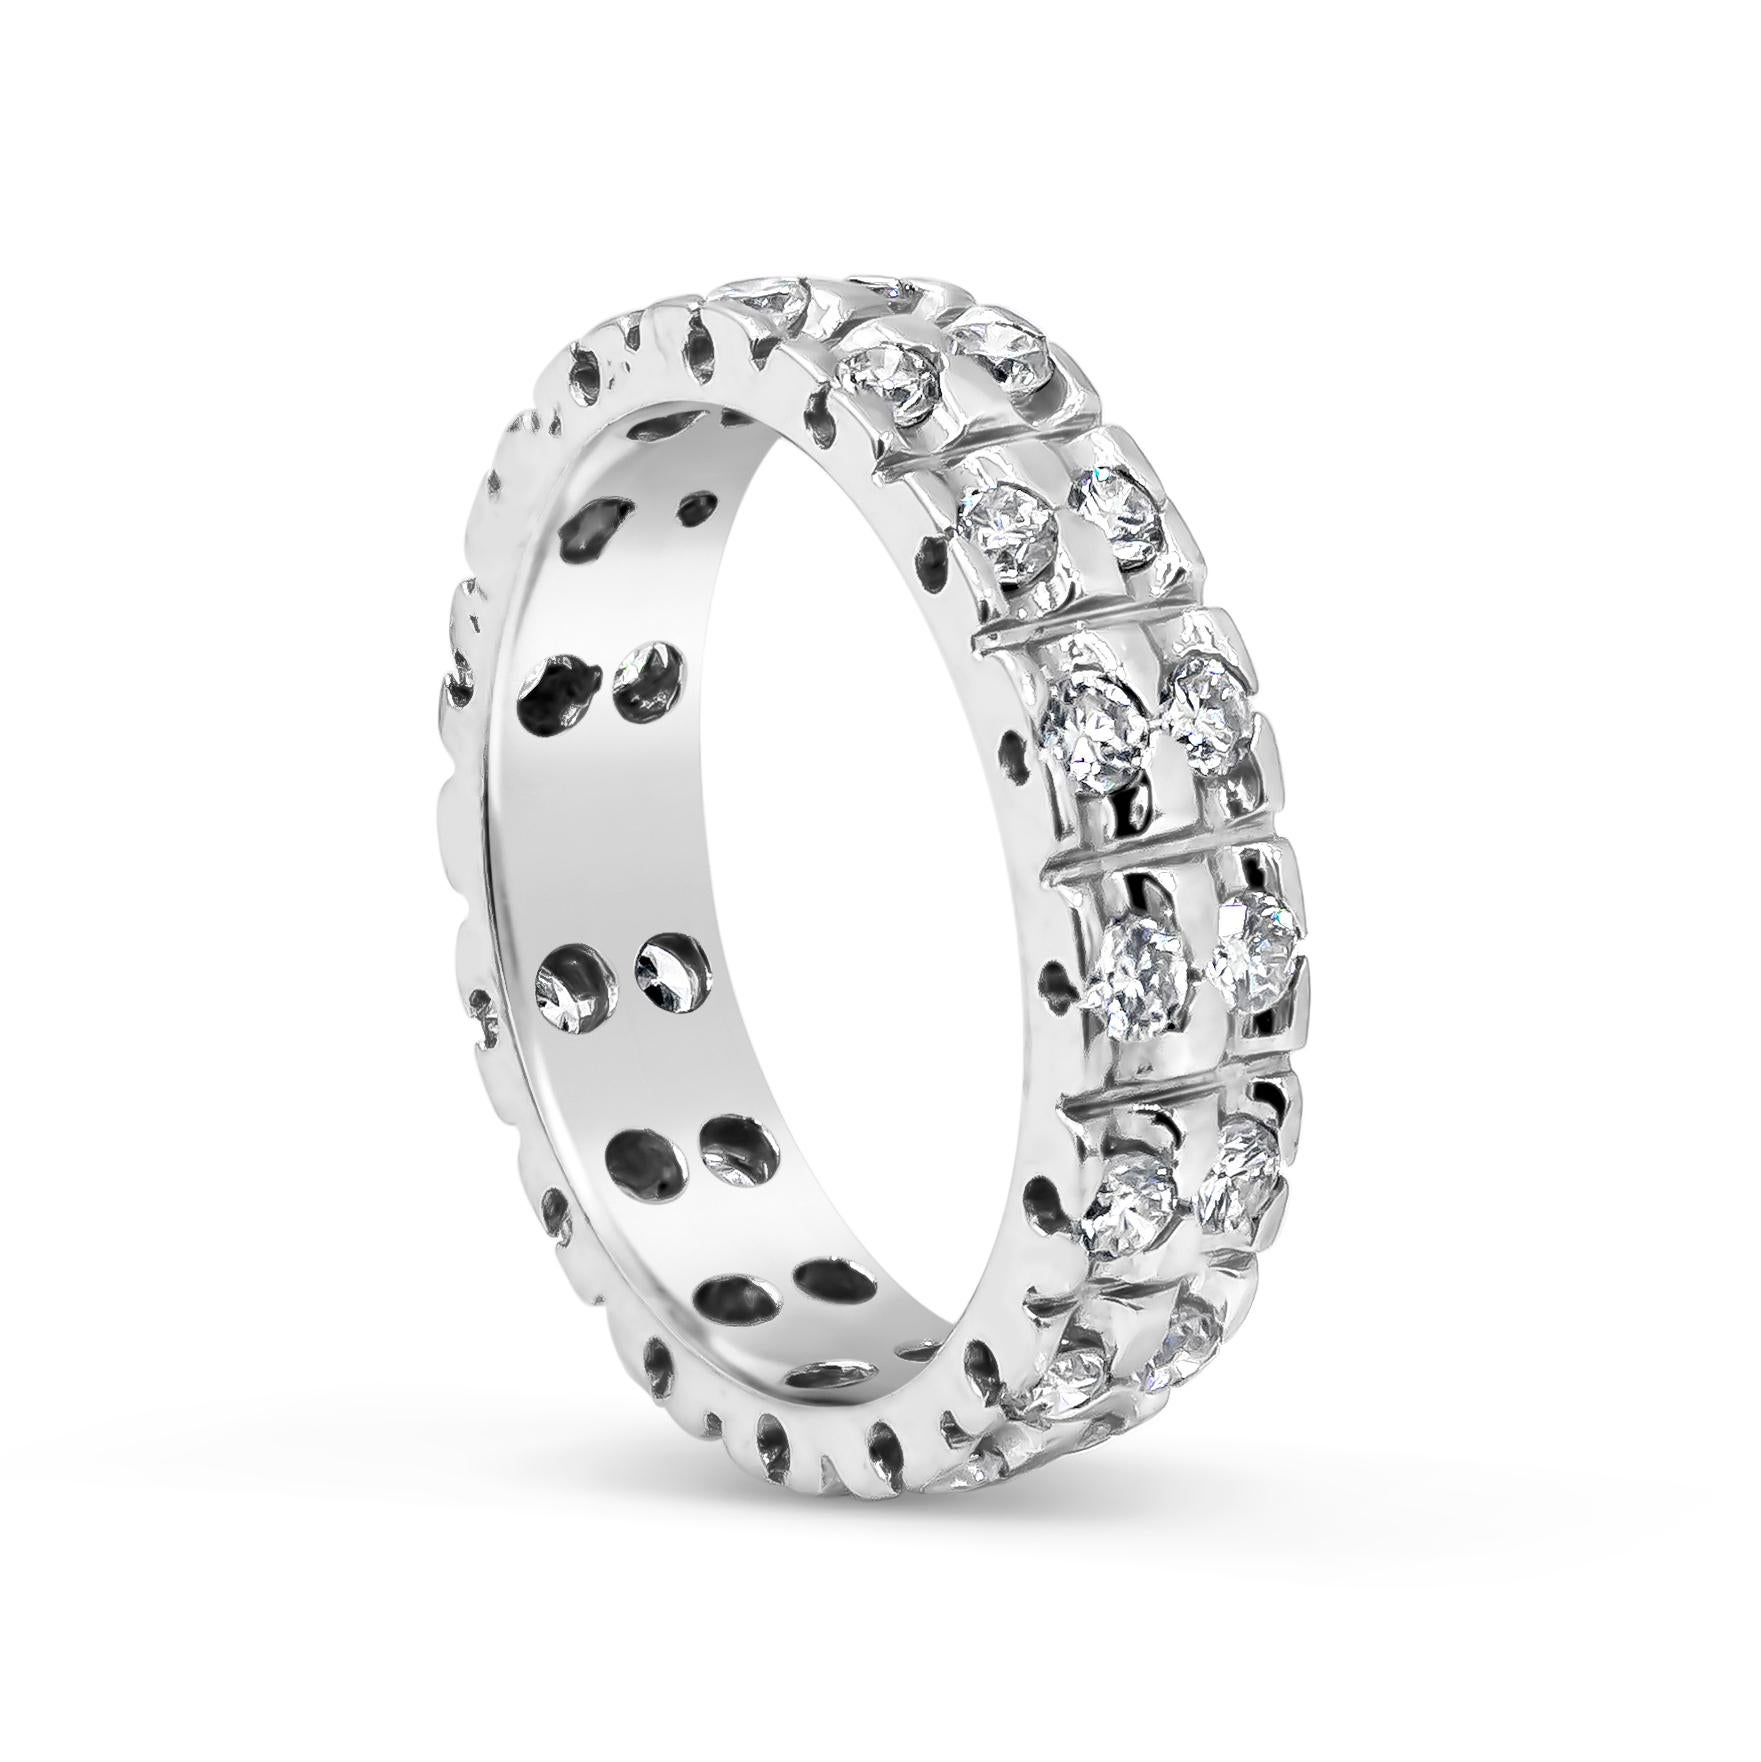 Showcasing two rows of round brilliant diamonds set in an 18 karat white gold mounting. Diamonds weigh 1.16 carats total. Size 7.5 US.

Style available in different price ranges. Prices are based on your selection of the 4C’s (Carat, Color, Clarity,